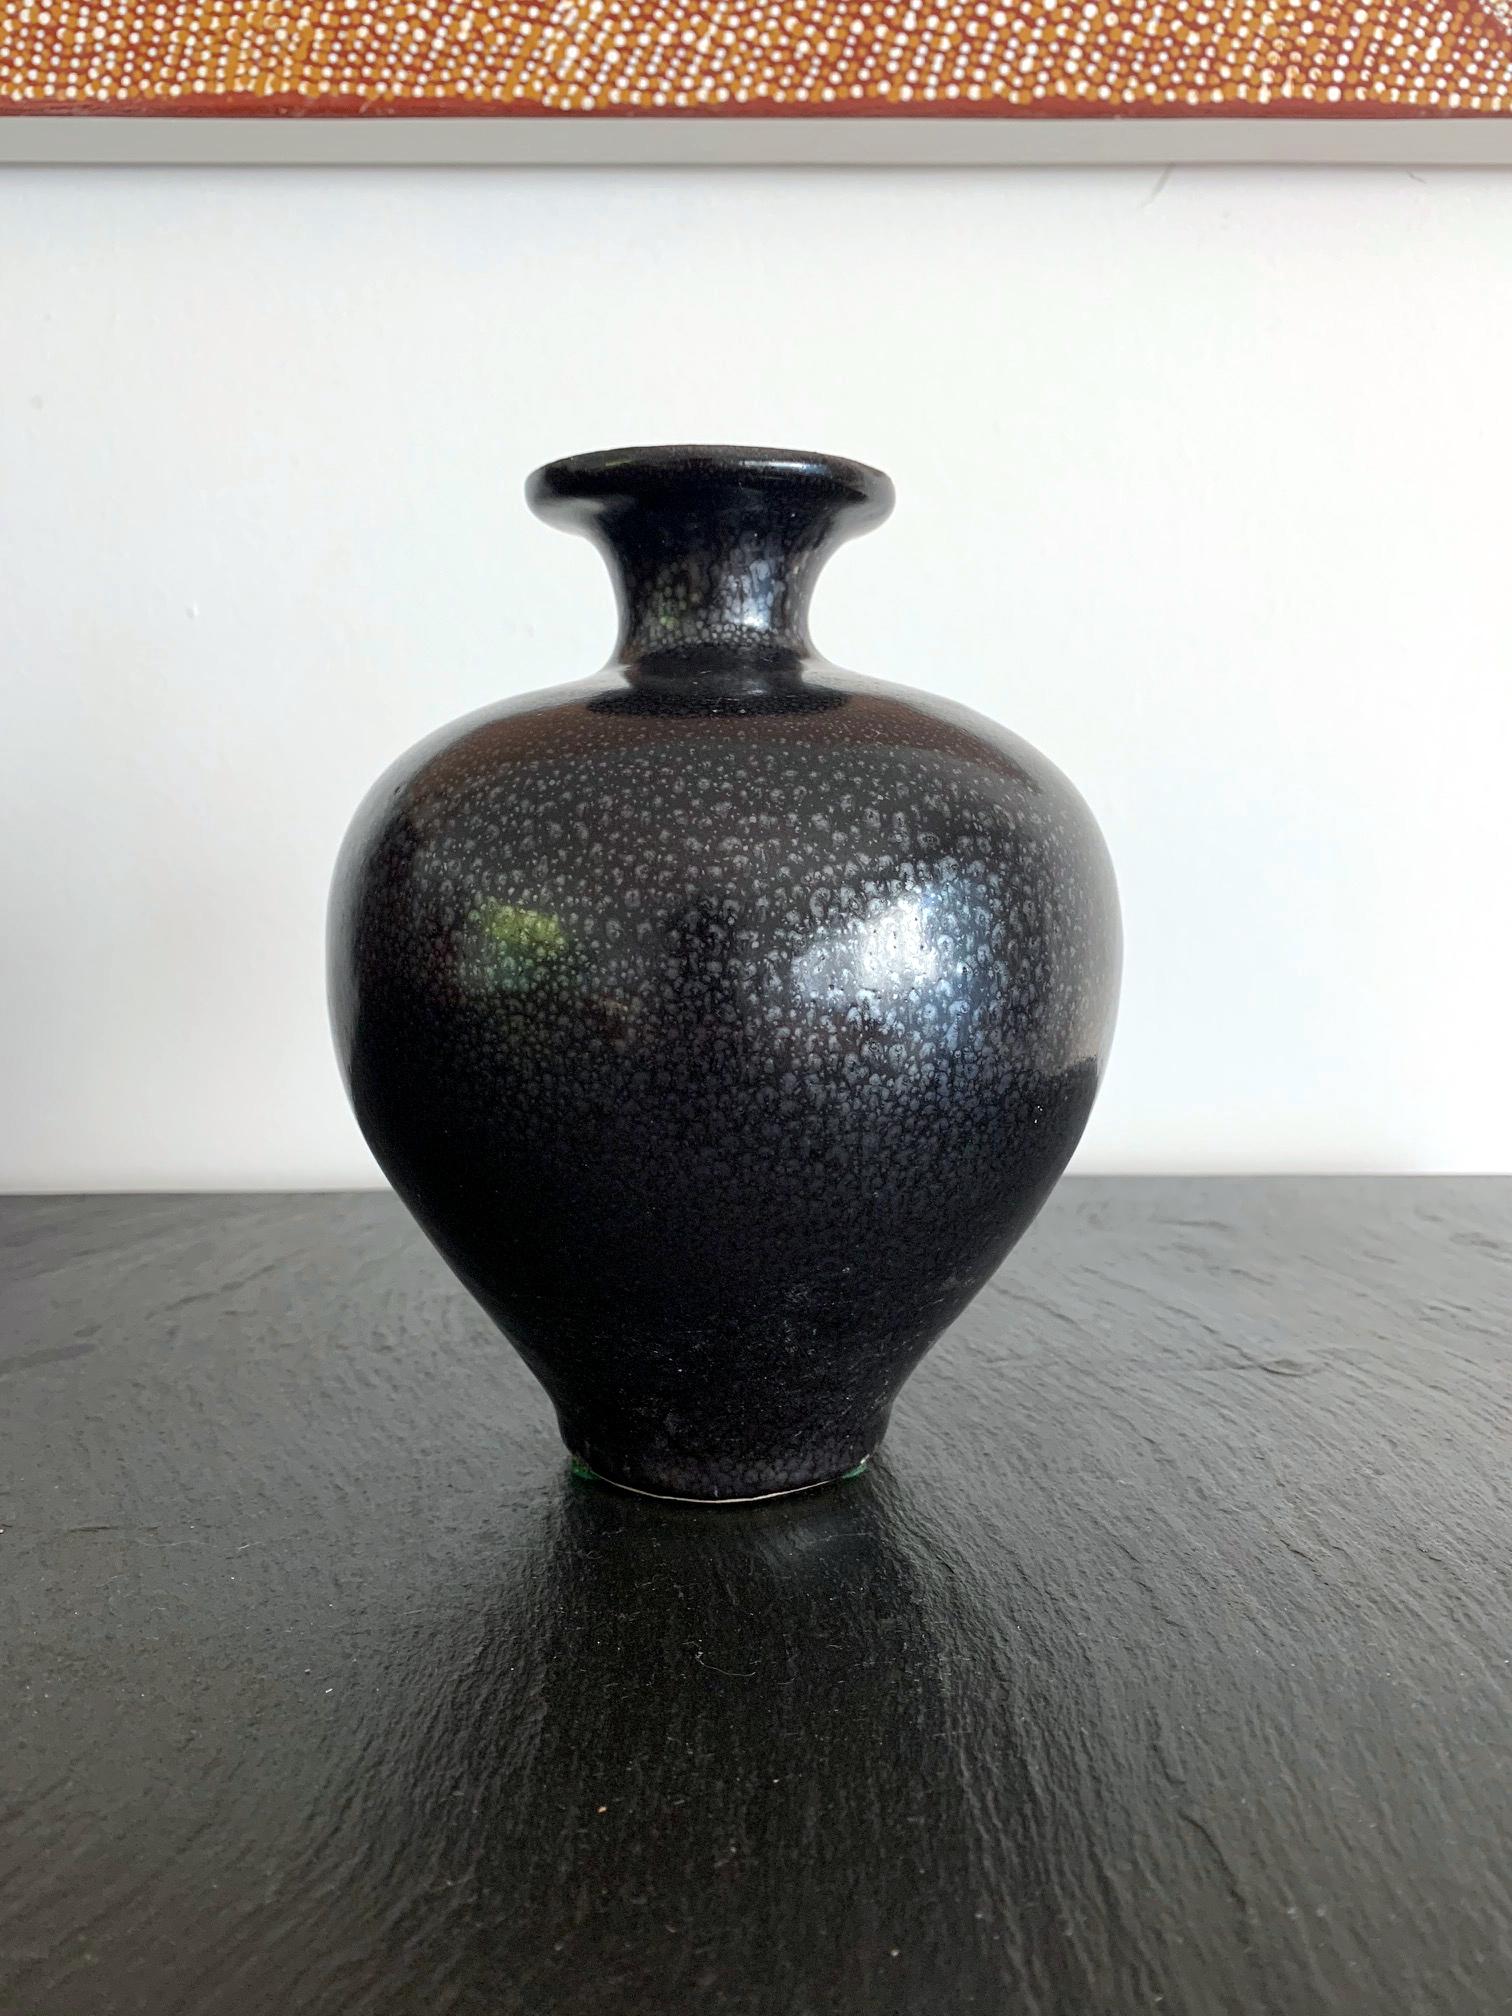 An elegant bulbous vase in classic form, potted from a whitish clay and glazed in a polished black. The oil-spot effect was applied evenly to the black surface, in the typical manner of Jian Ware (Jianzhou Kilns of Fujian Province) of Song dynasty